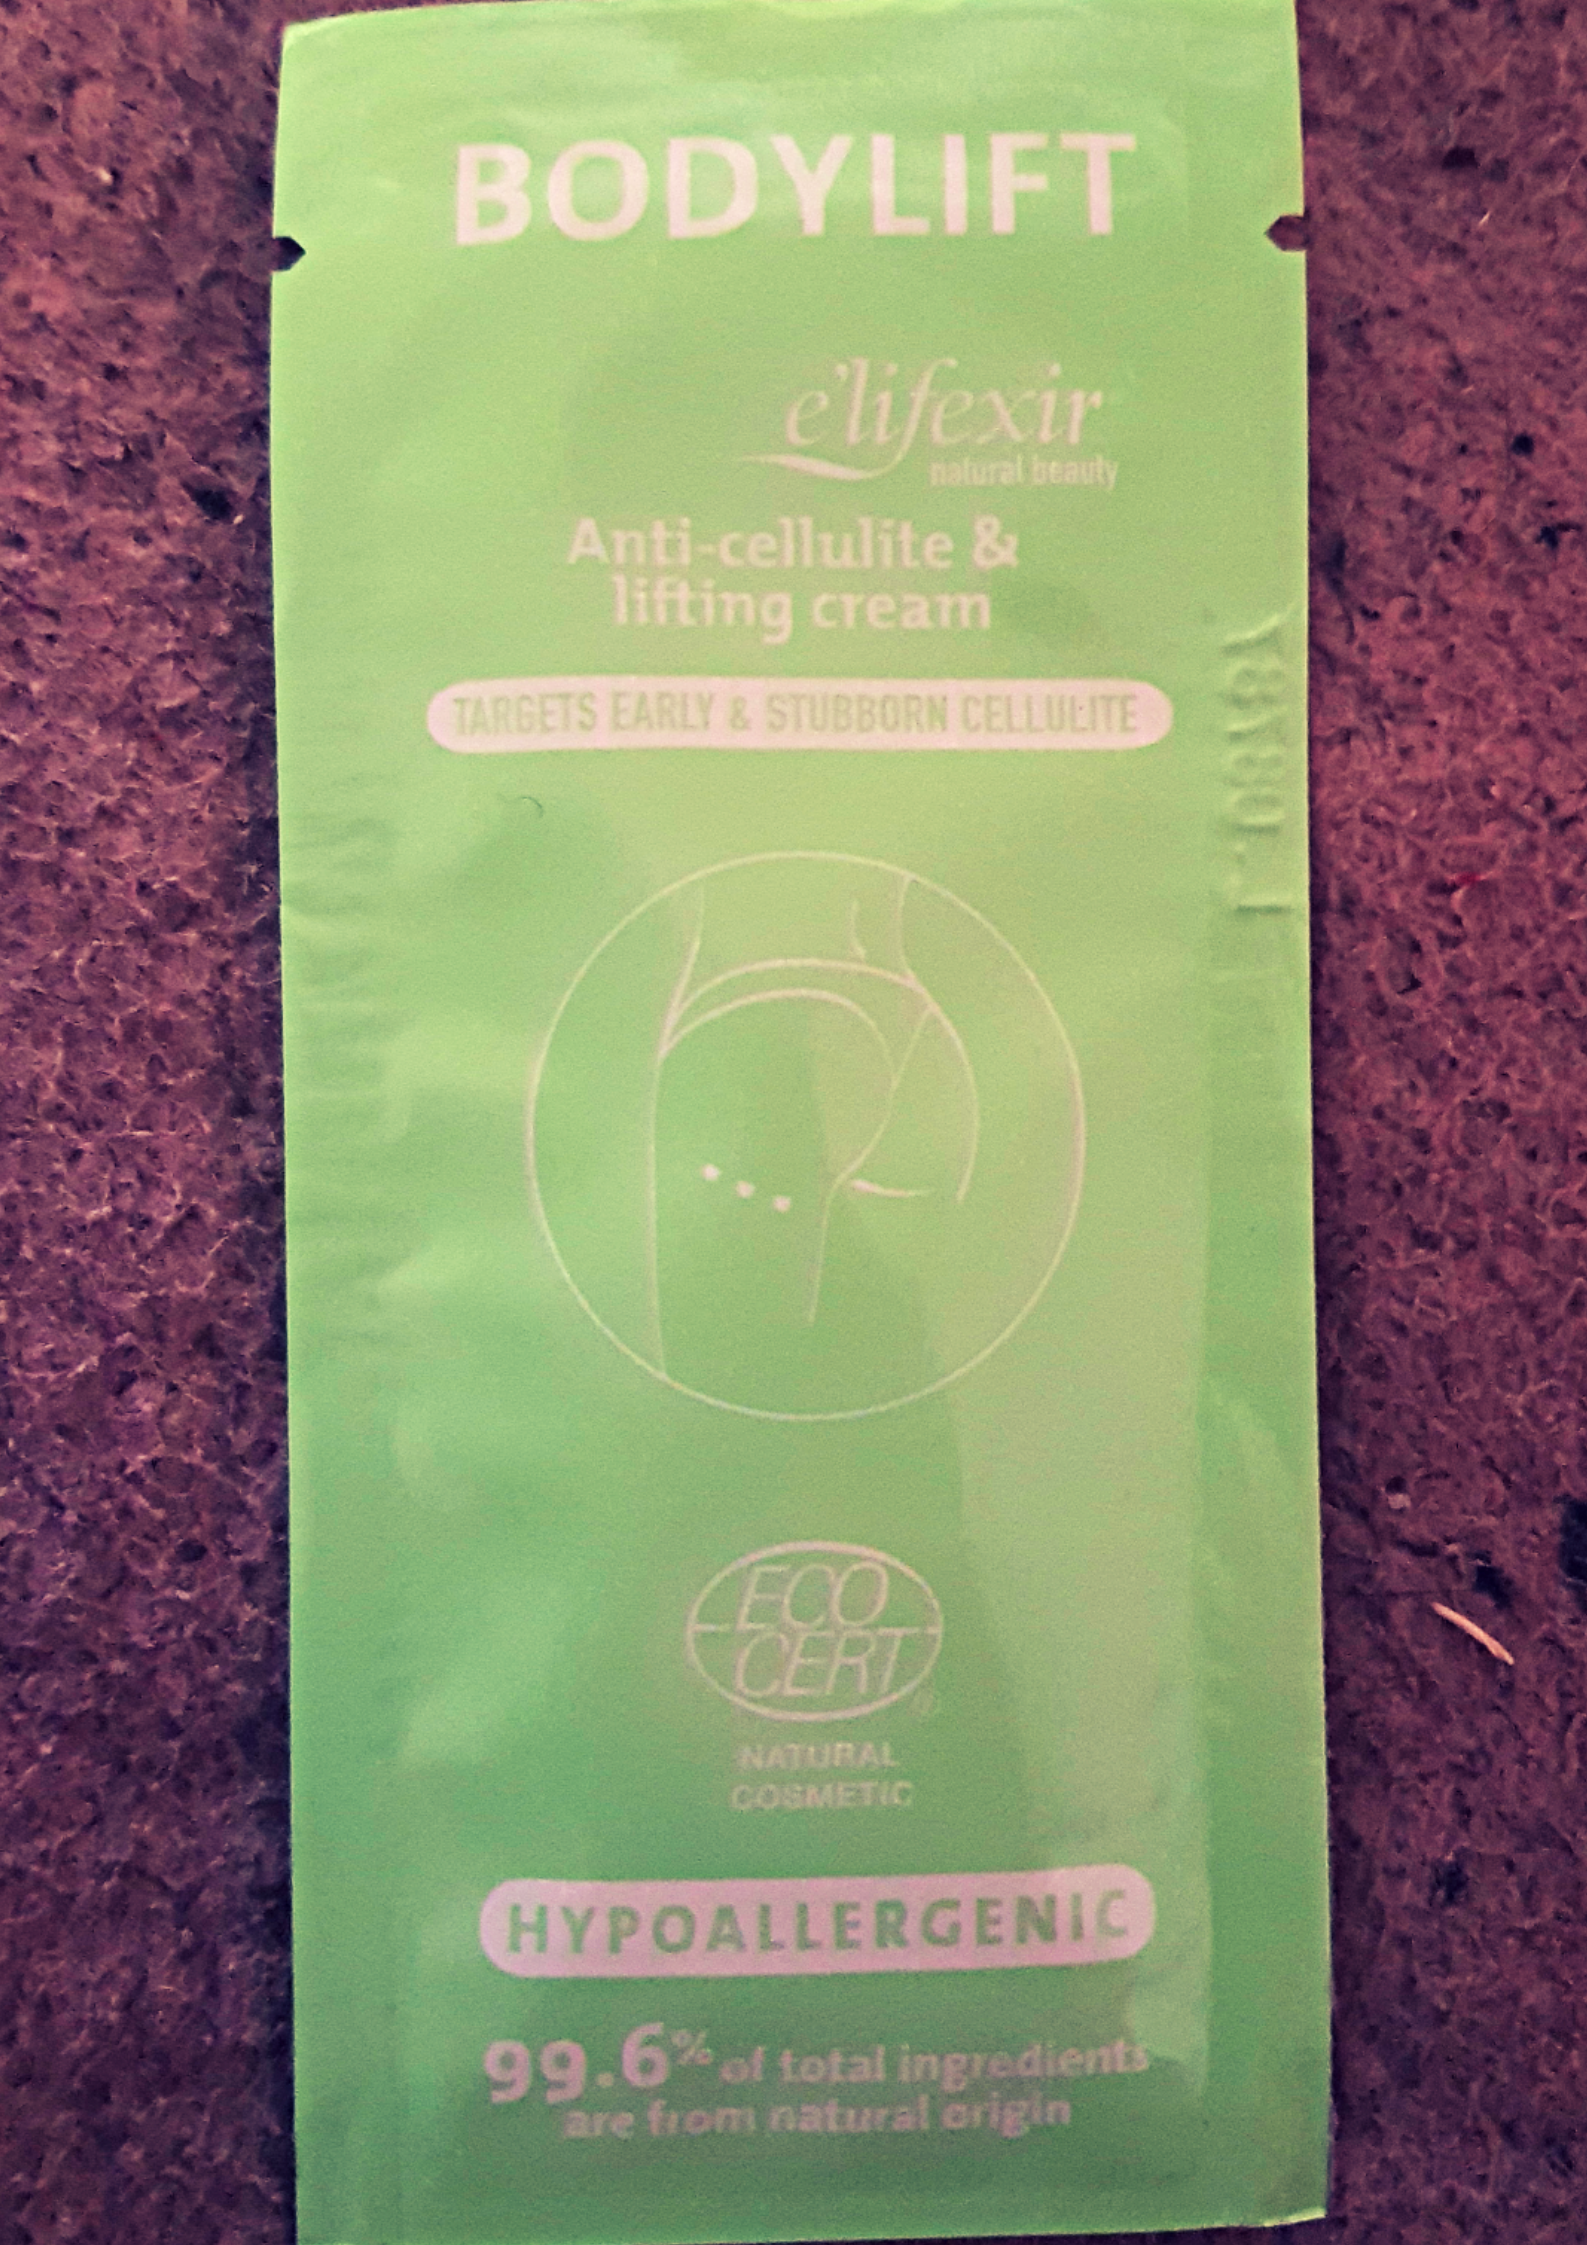 Green sachet with Bodylift written on it with a diagram of a pushed up bottom